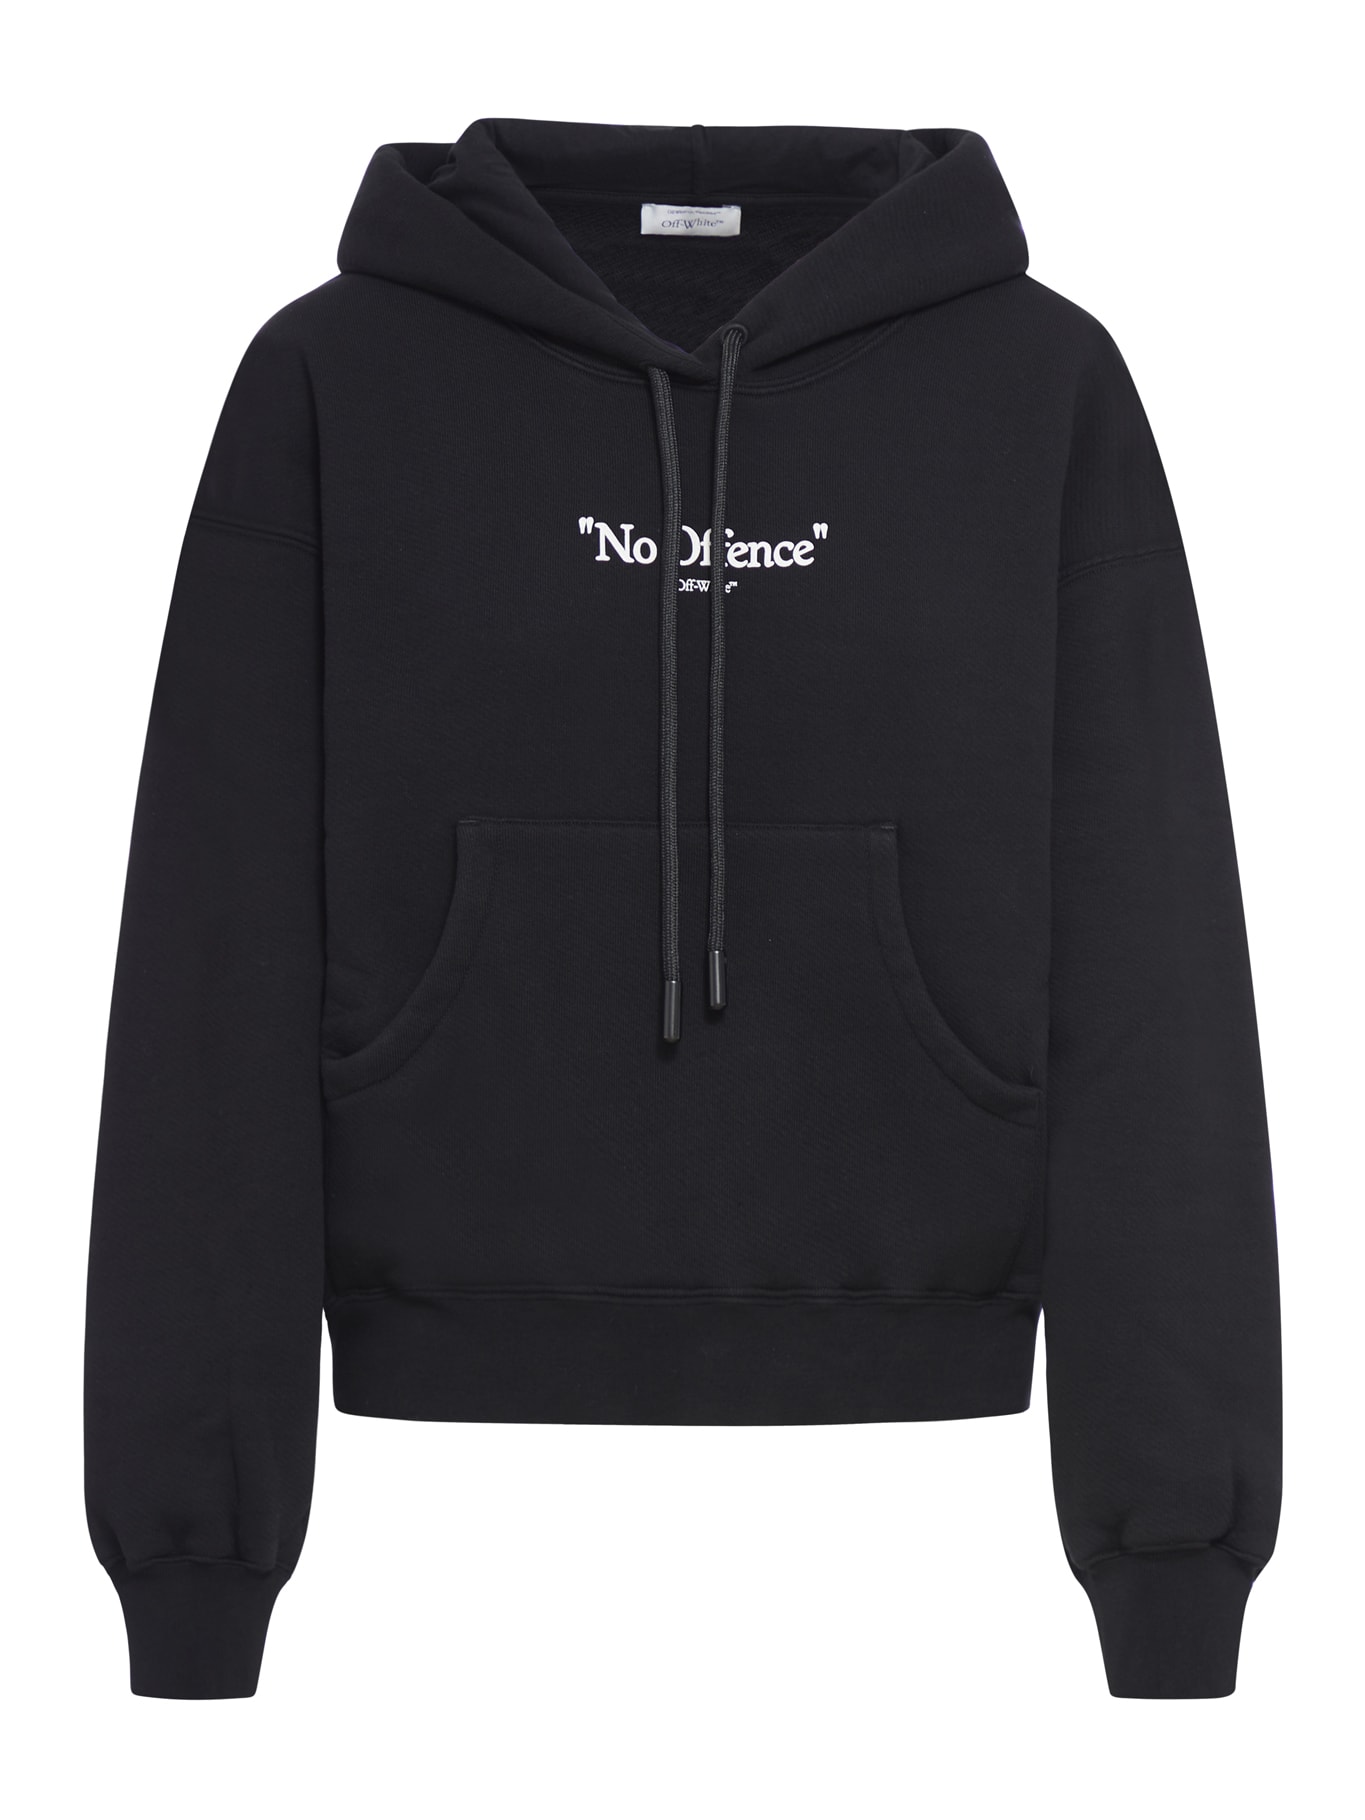 OFF-WHITE NO OFFENCE OVER HOODIE BLACK WHITE